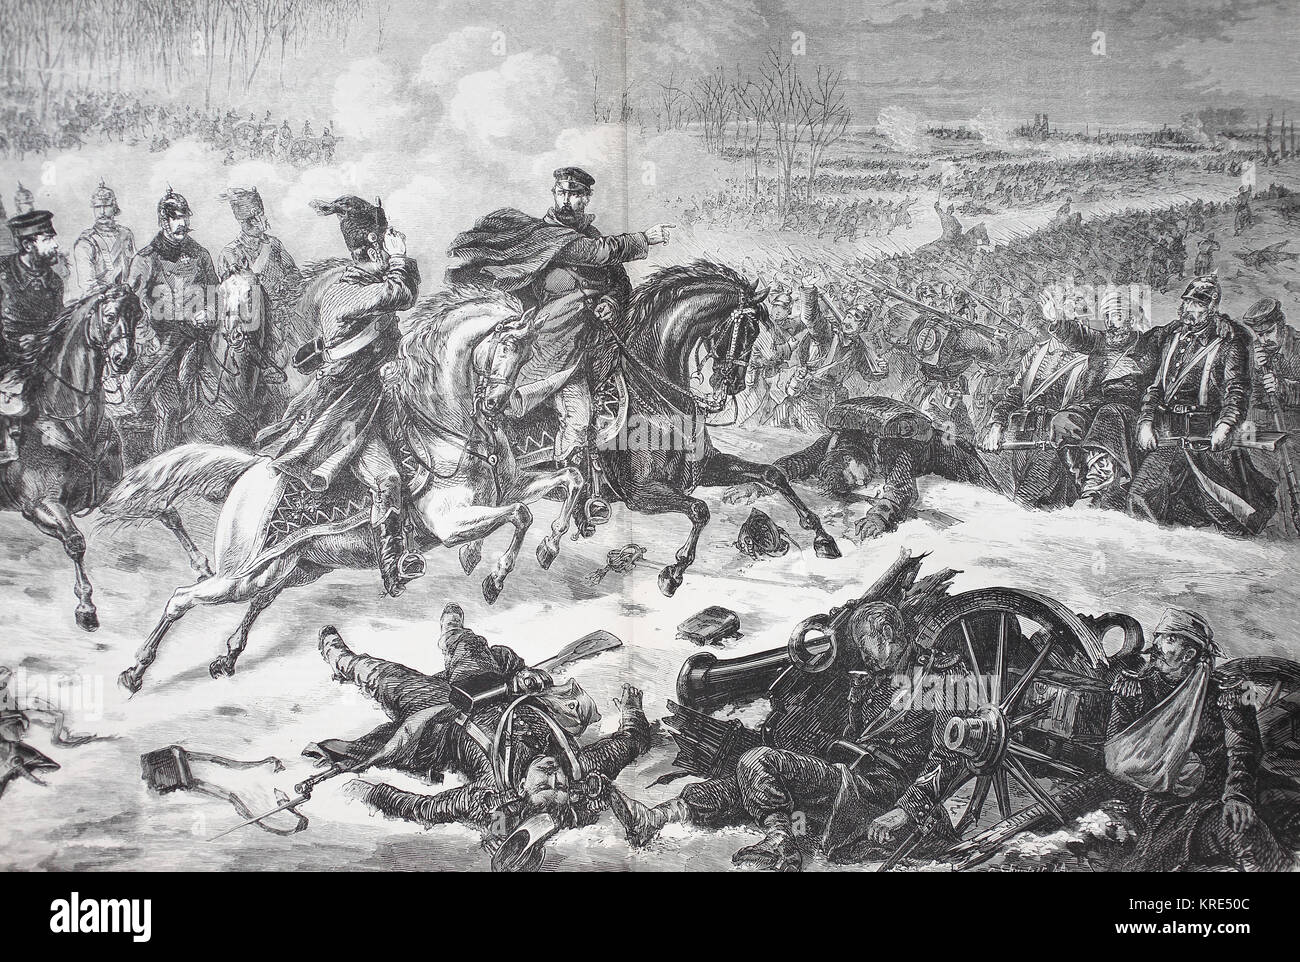 Field Marshal Prince Friedrich Karl and his staff in battle at Orleans, France, on the evening of December 4, in the Franco-Prussian War of 1870/1871, Stock Photo